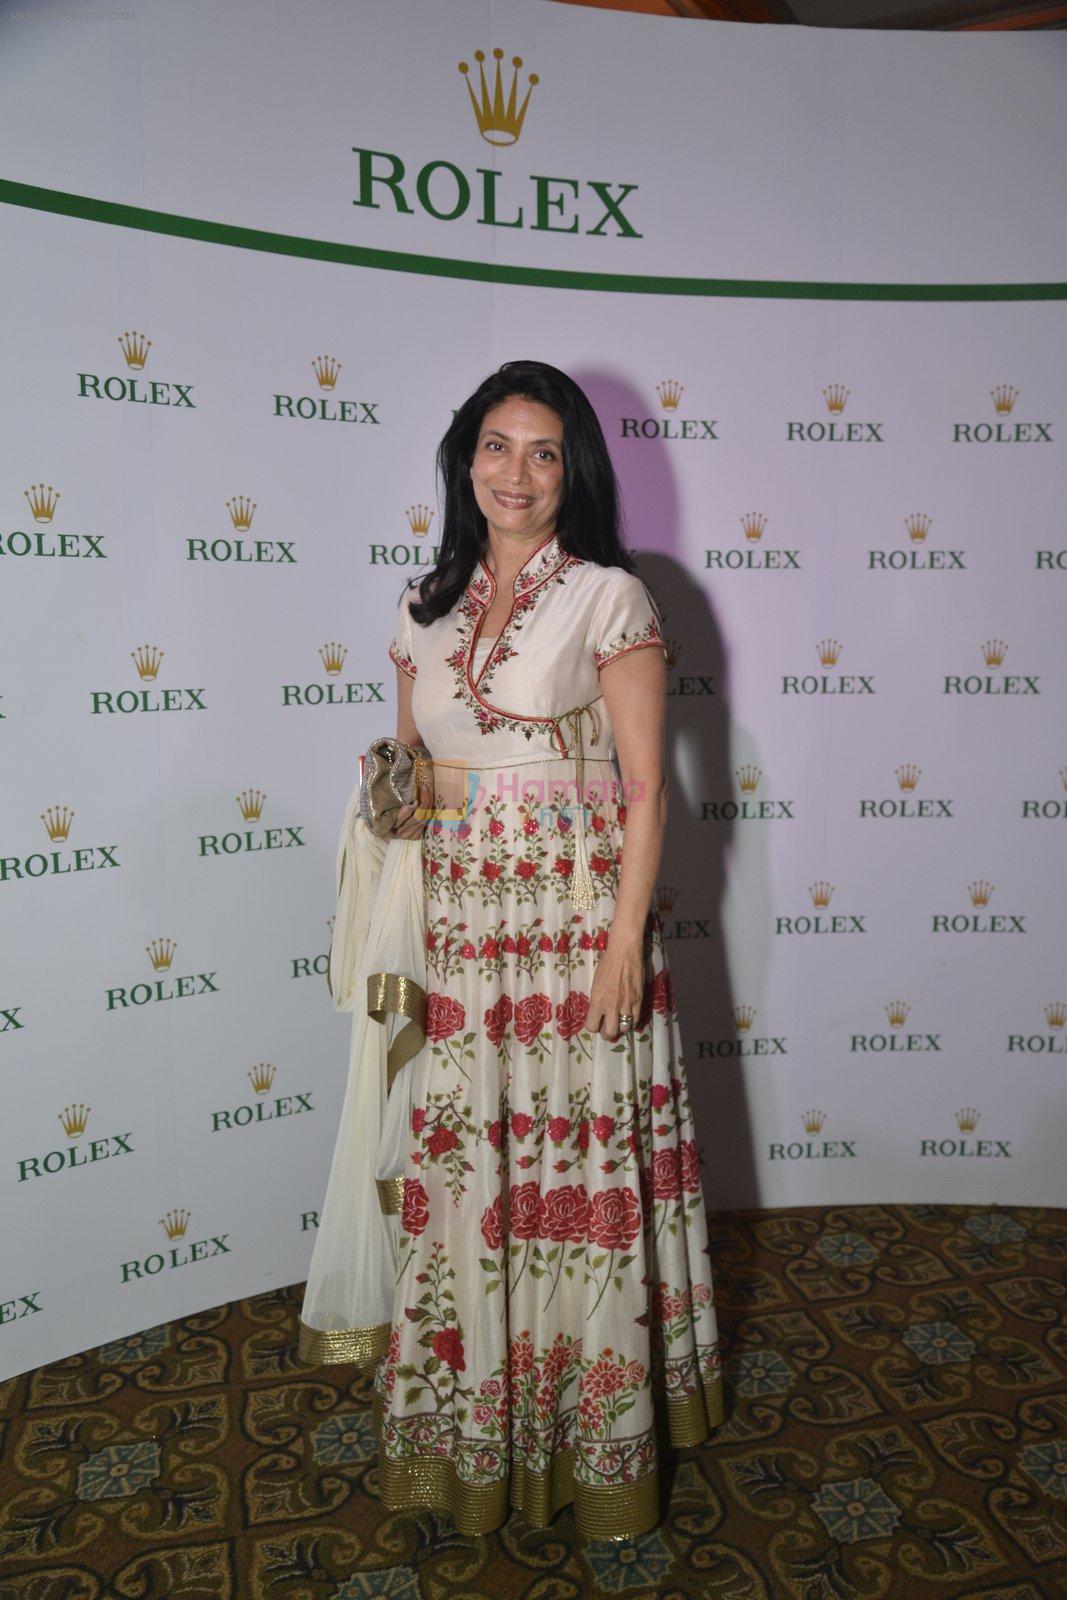 at Zubin Mehta dinner hosted by Rolex on 17th April 2016